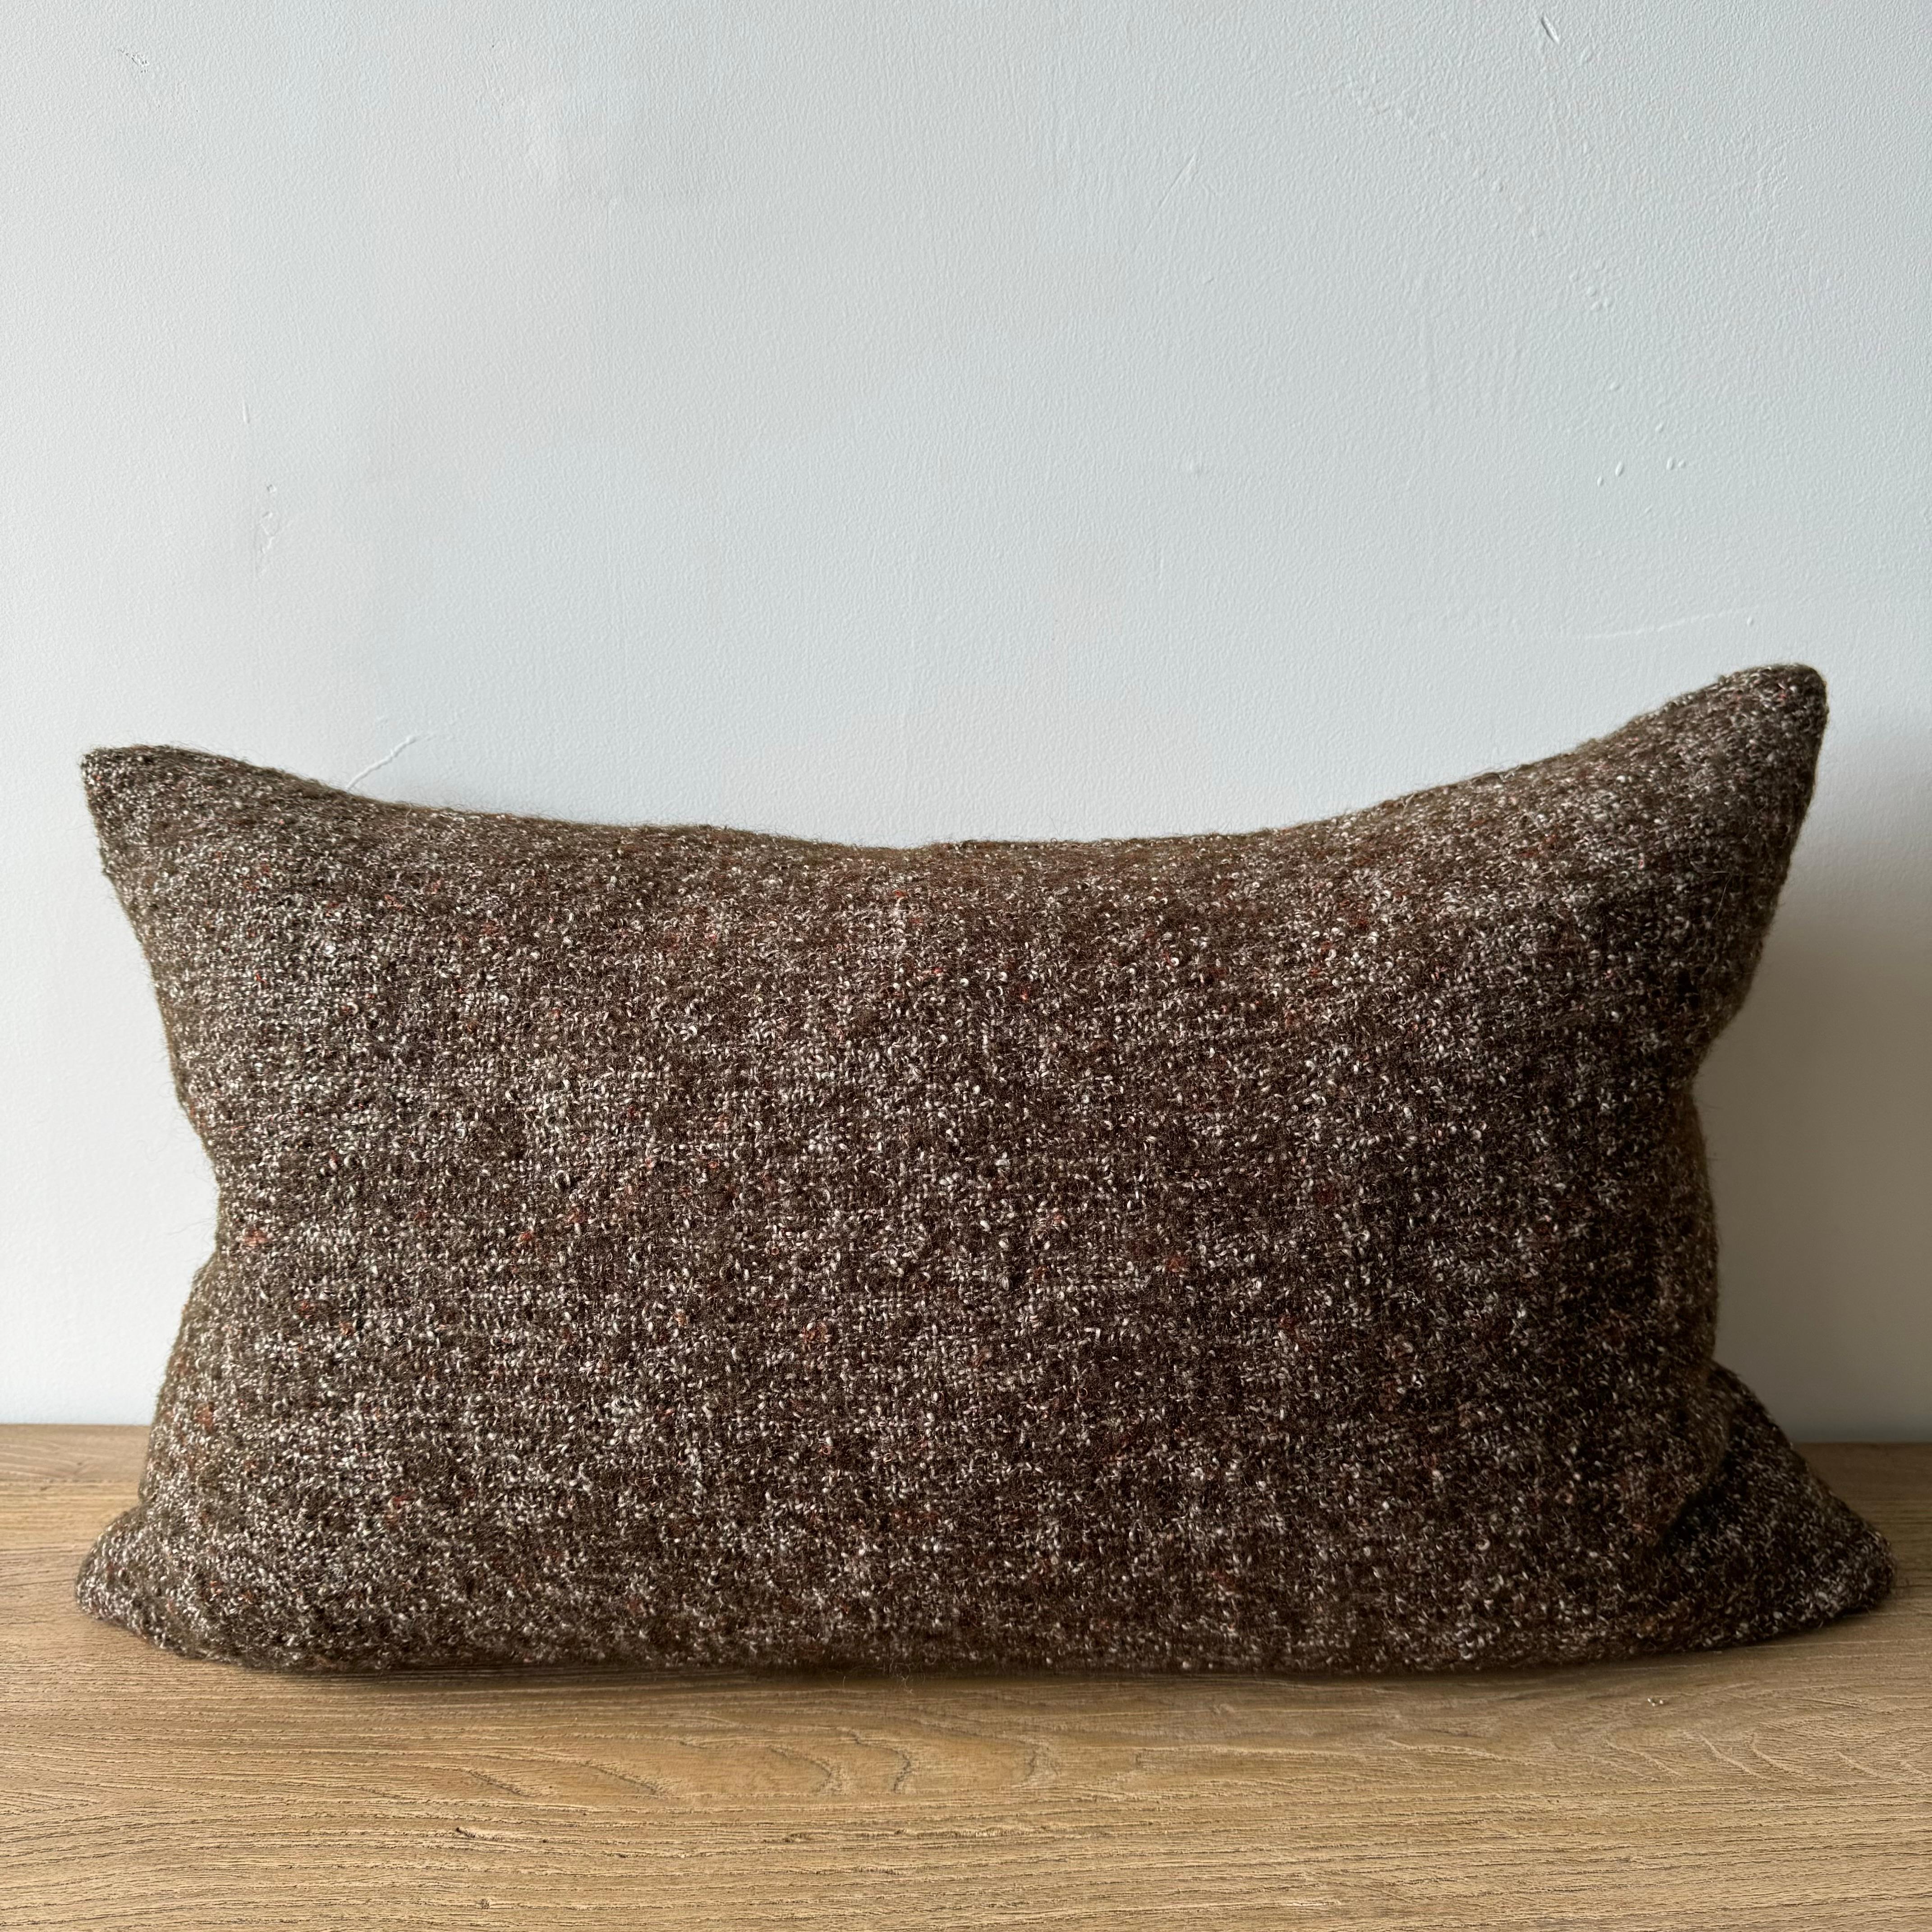 A Rich coco brown rust and natural flax oatmeal woven fibers in a stonewash finish create this luxurious soft pillow. Sewn with an antique brass zipper closure and overlocked edges.
Includes a down/ feather insert.
Size: 15